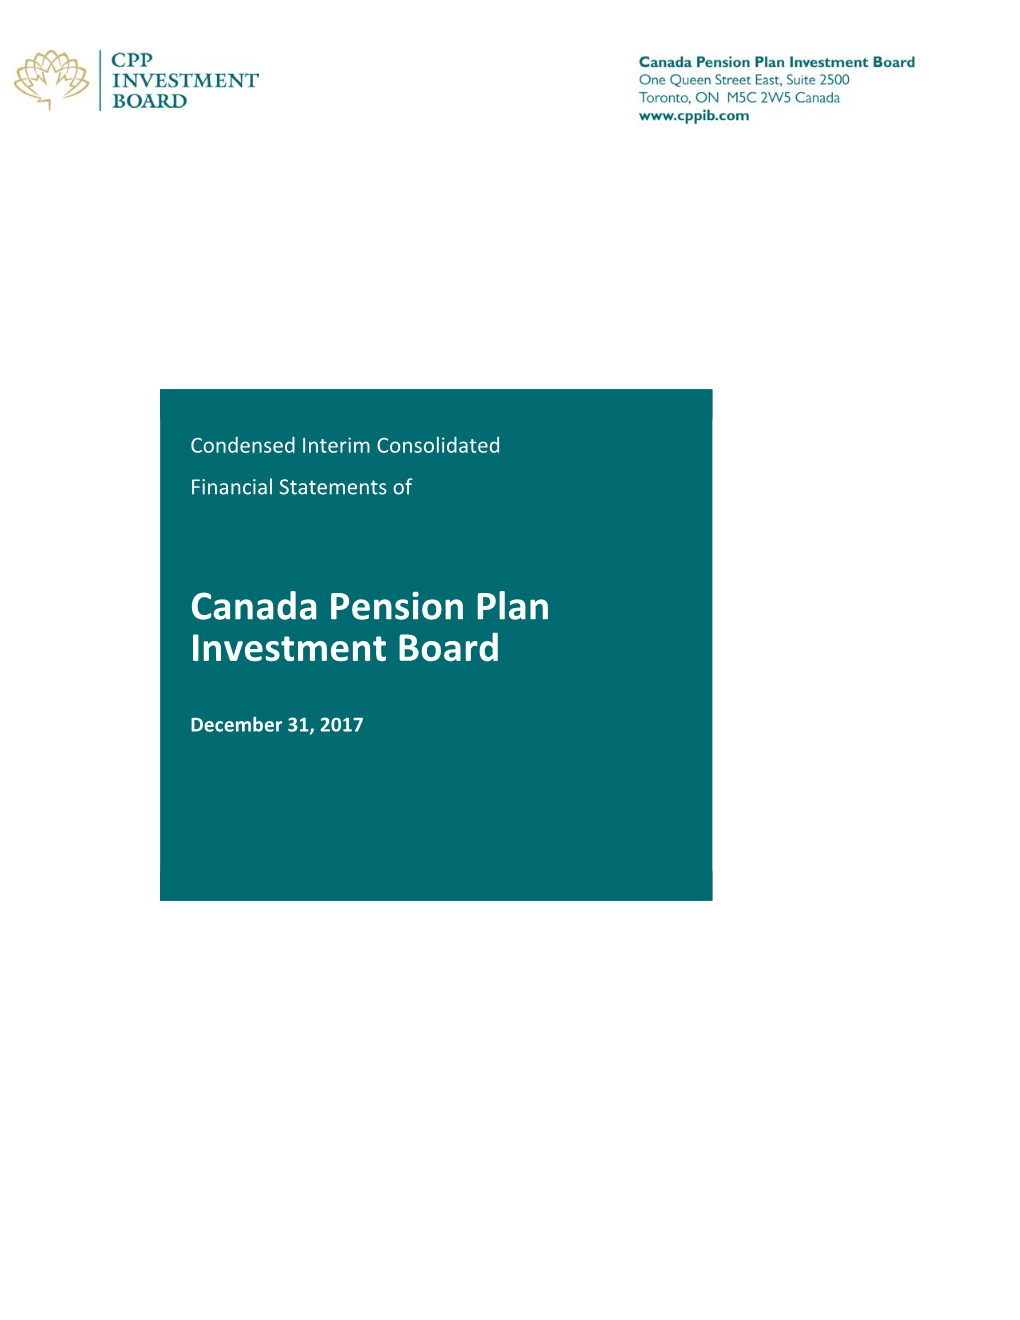 Canada Pension Plan Investment Board Condensed Interim Consolidated Balance Sheet As at December 31, 2017 (Unaudited)